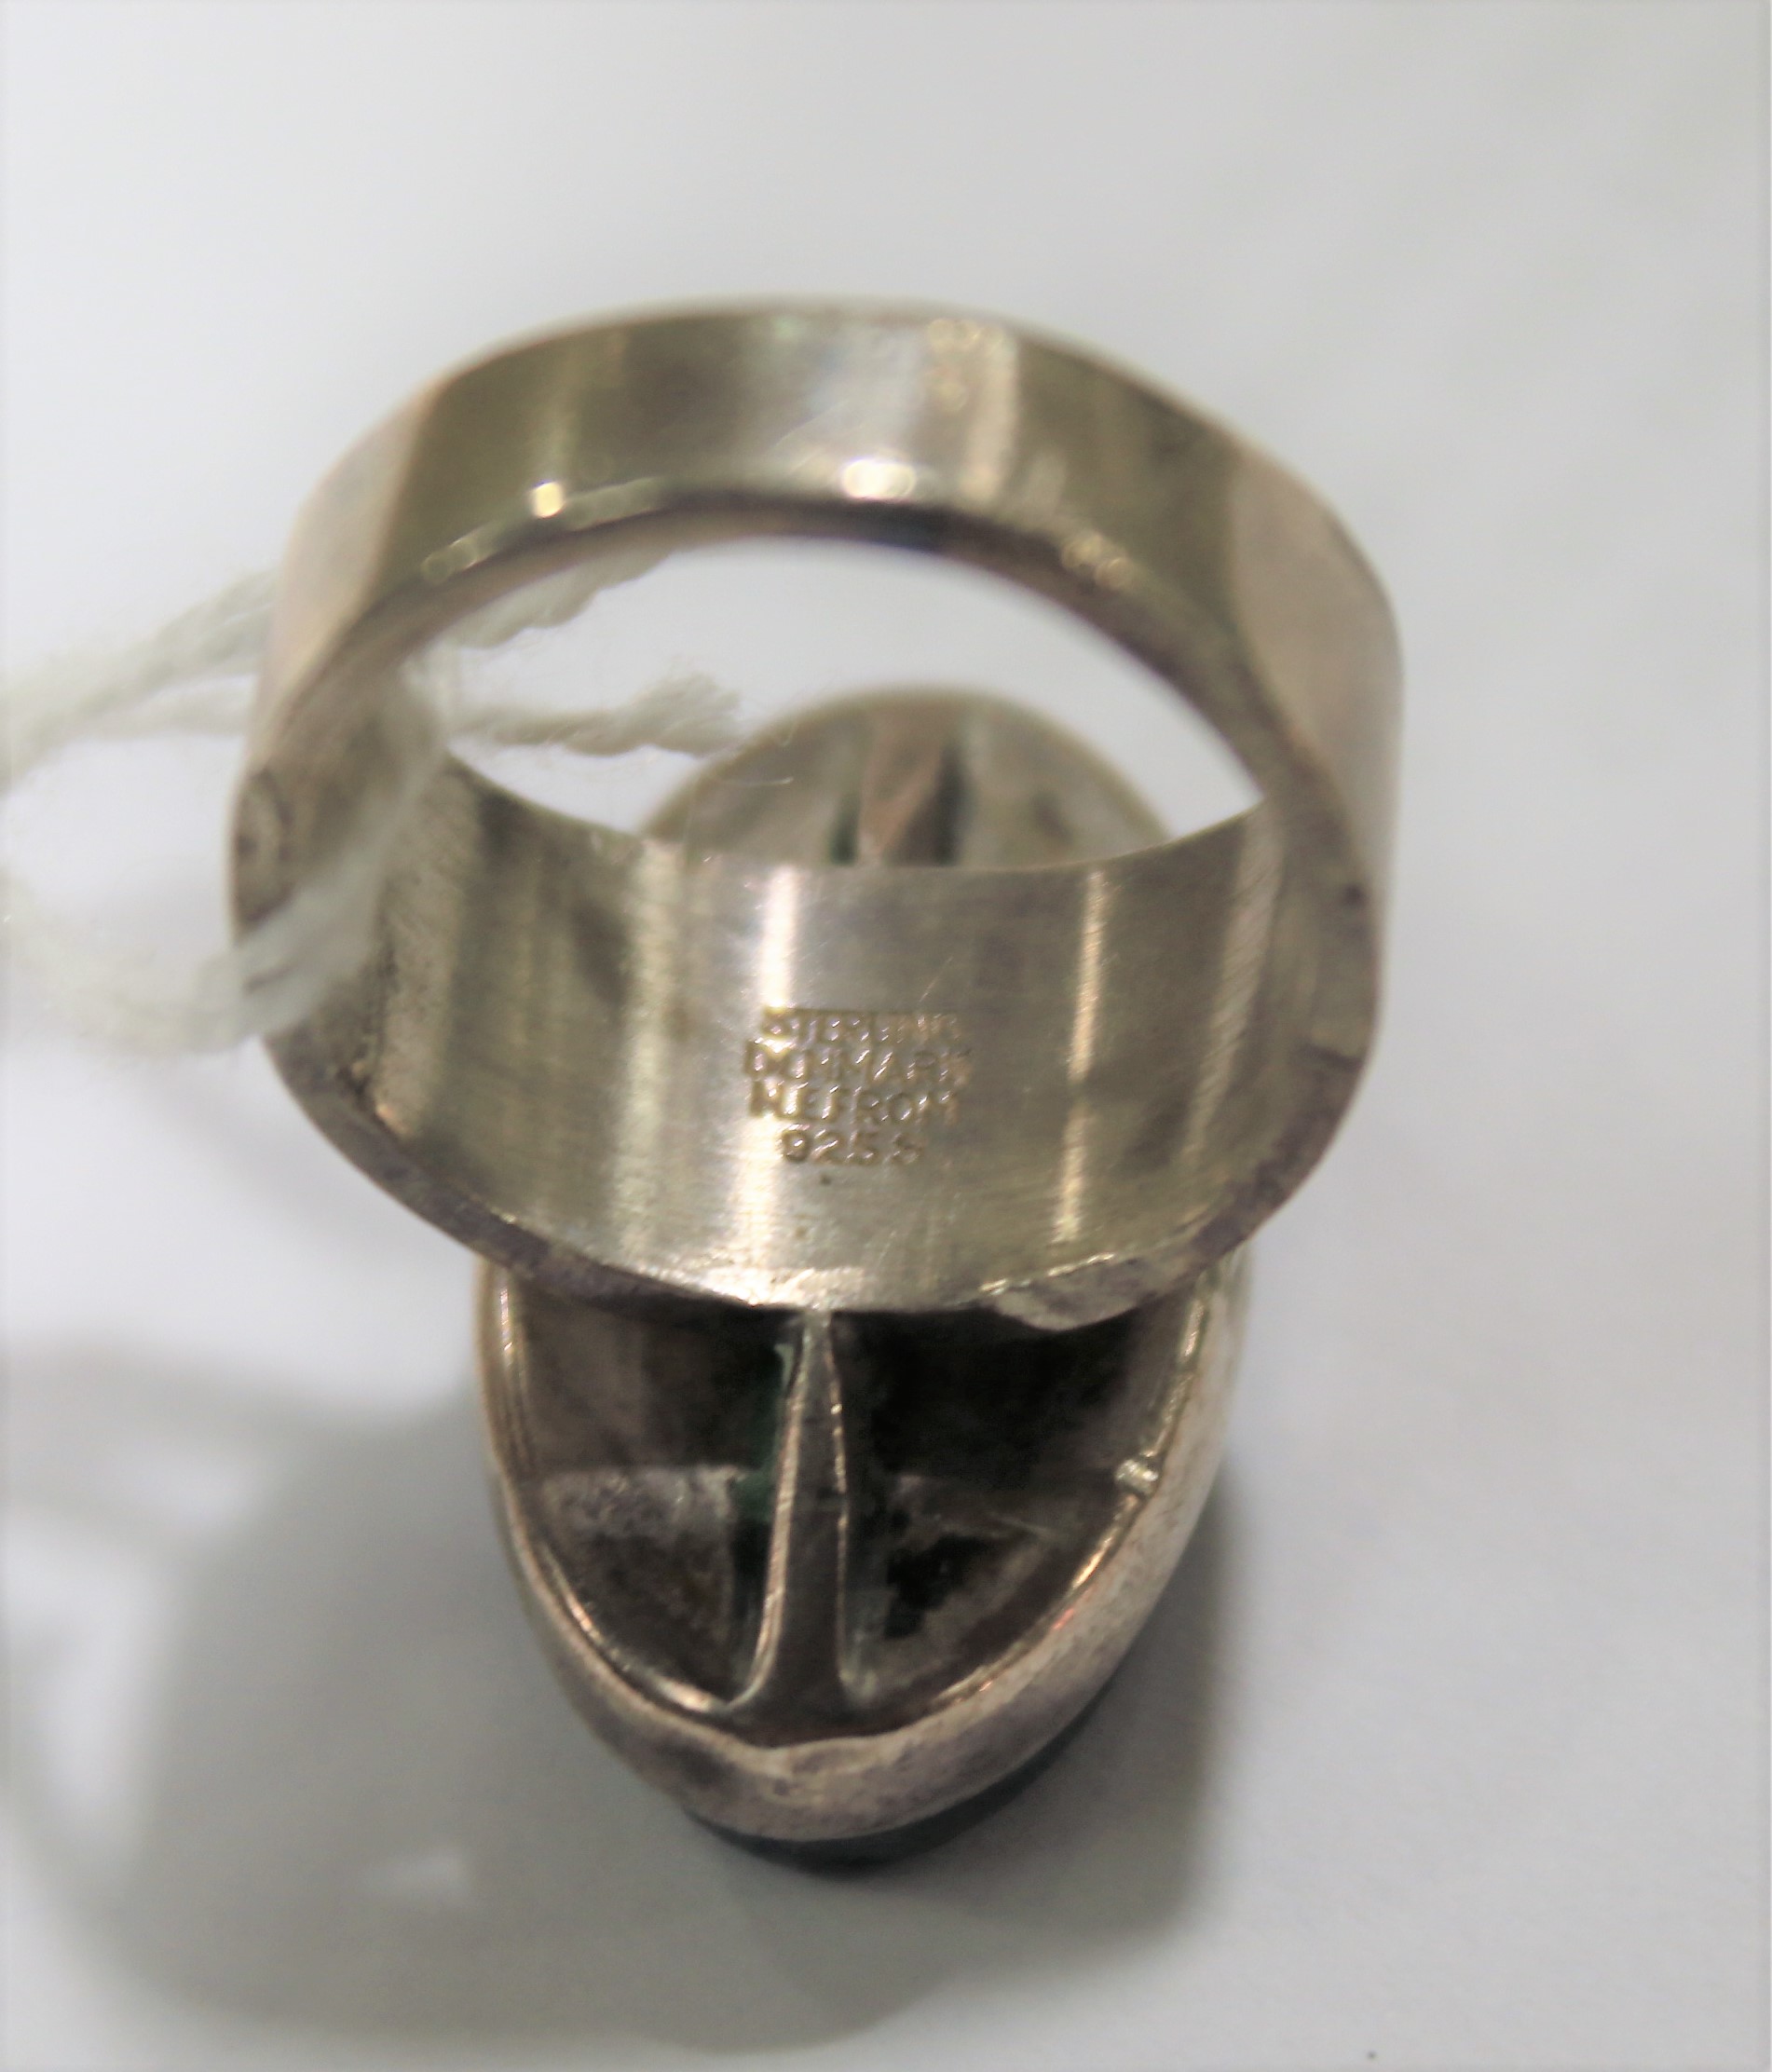 A contemporary Danish silver ring by N E From, together with another contemporary silver ring. - Image 3 of 4